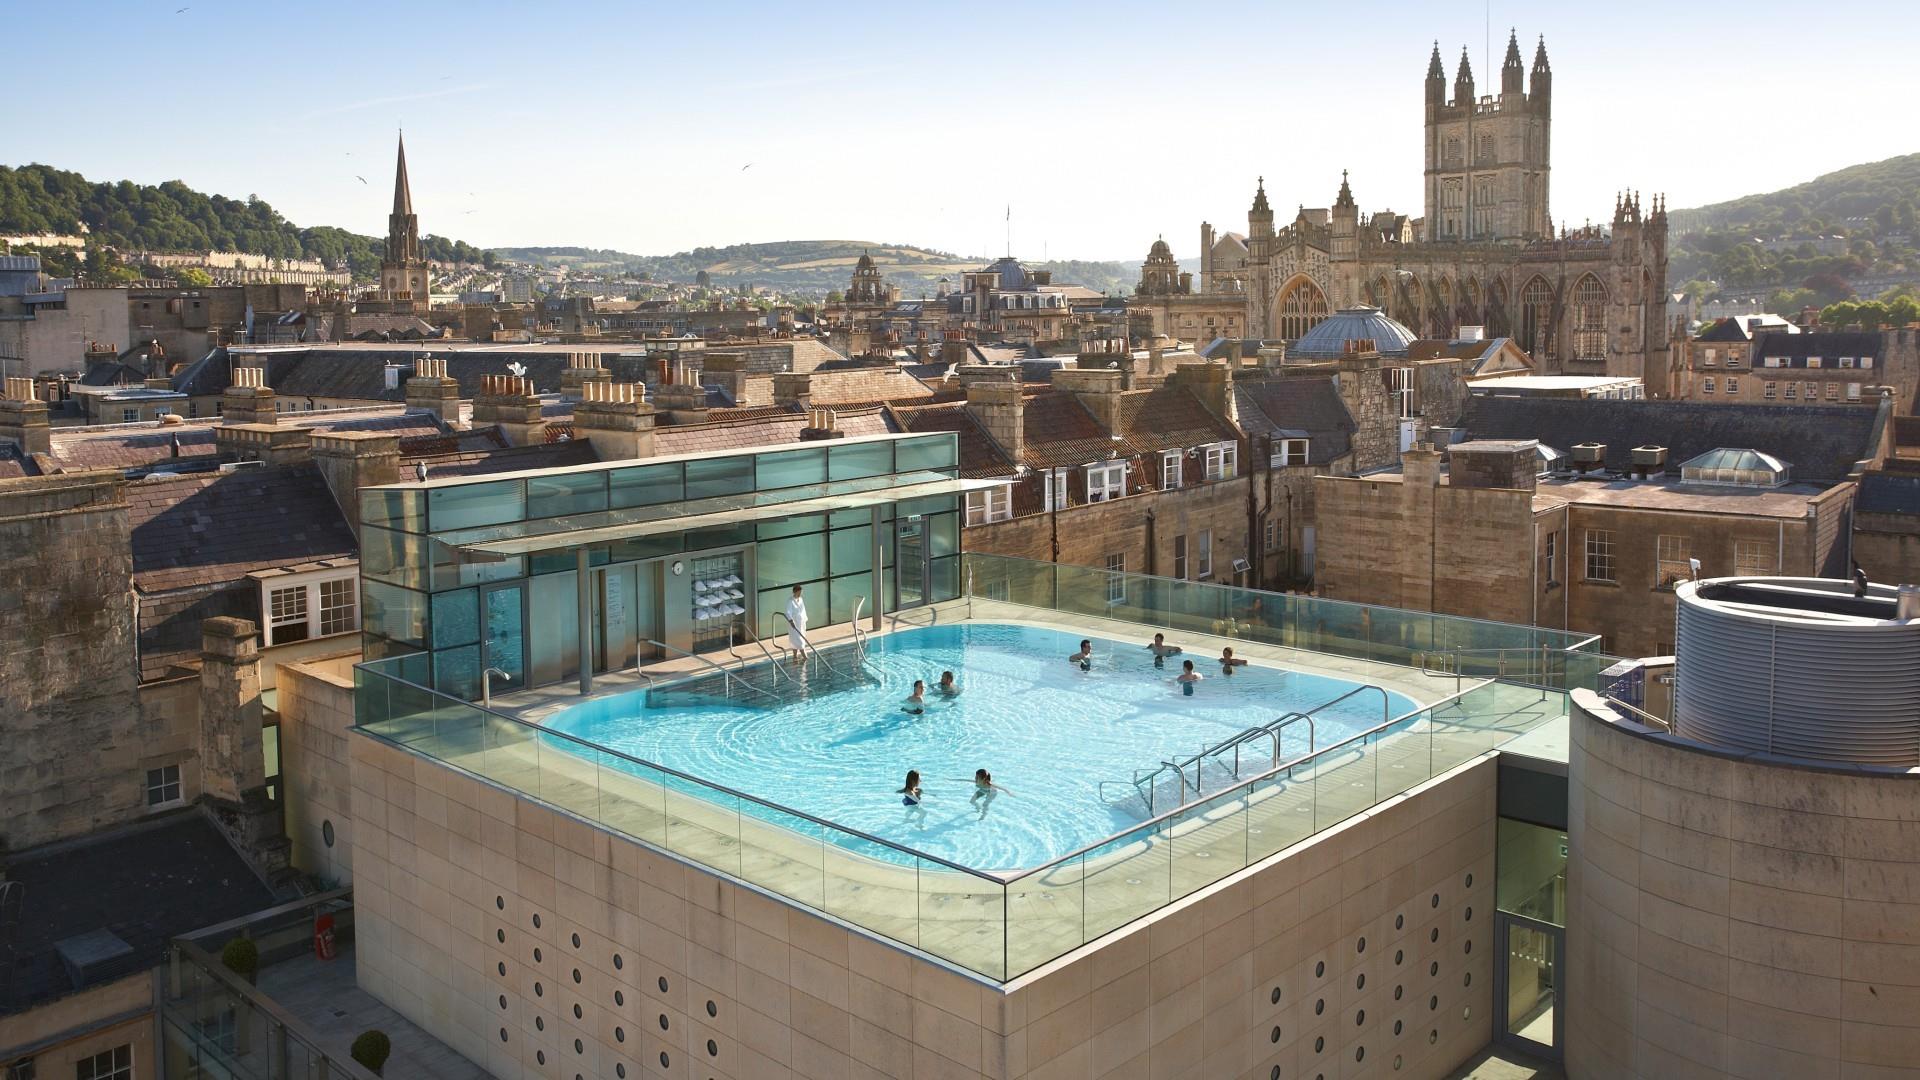 Thermae Bath Spa rooftop pool and Bath's city skyline by day